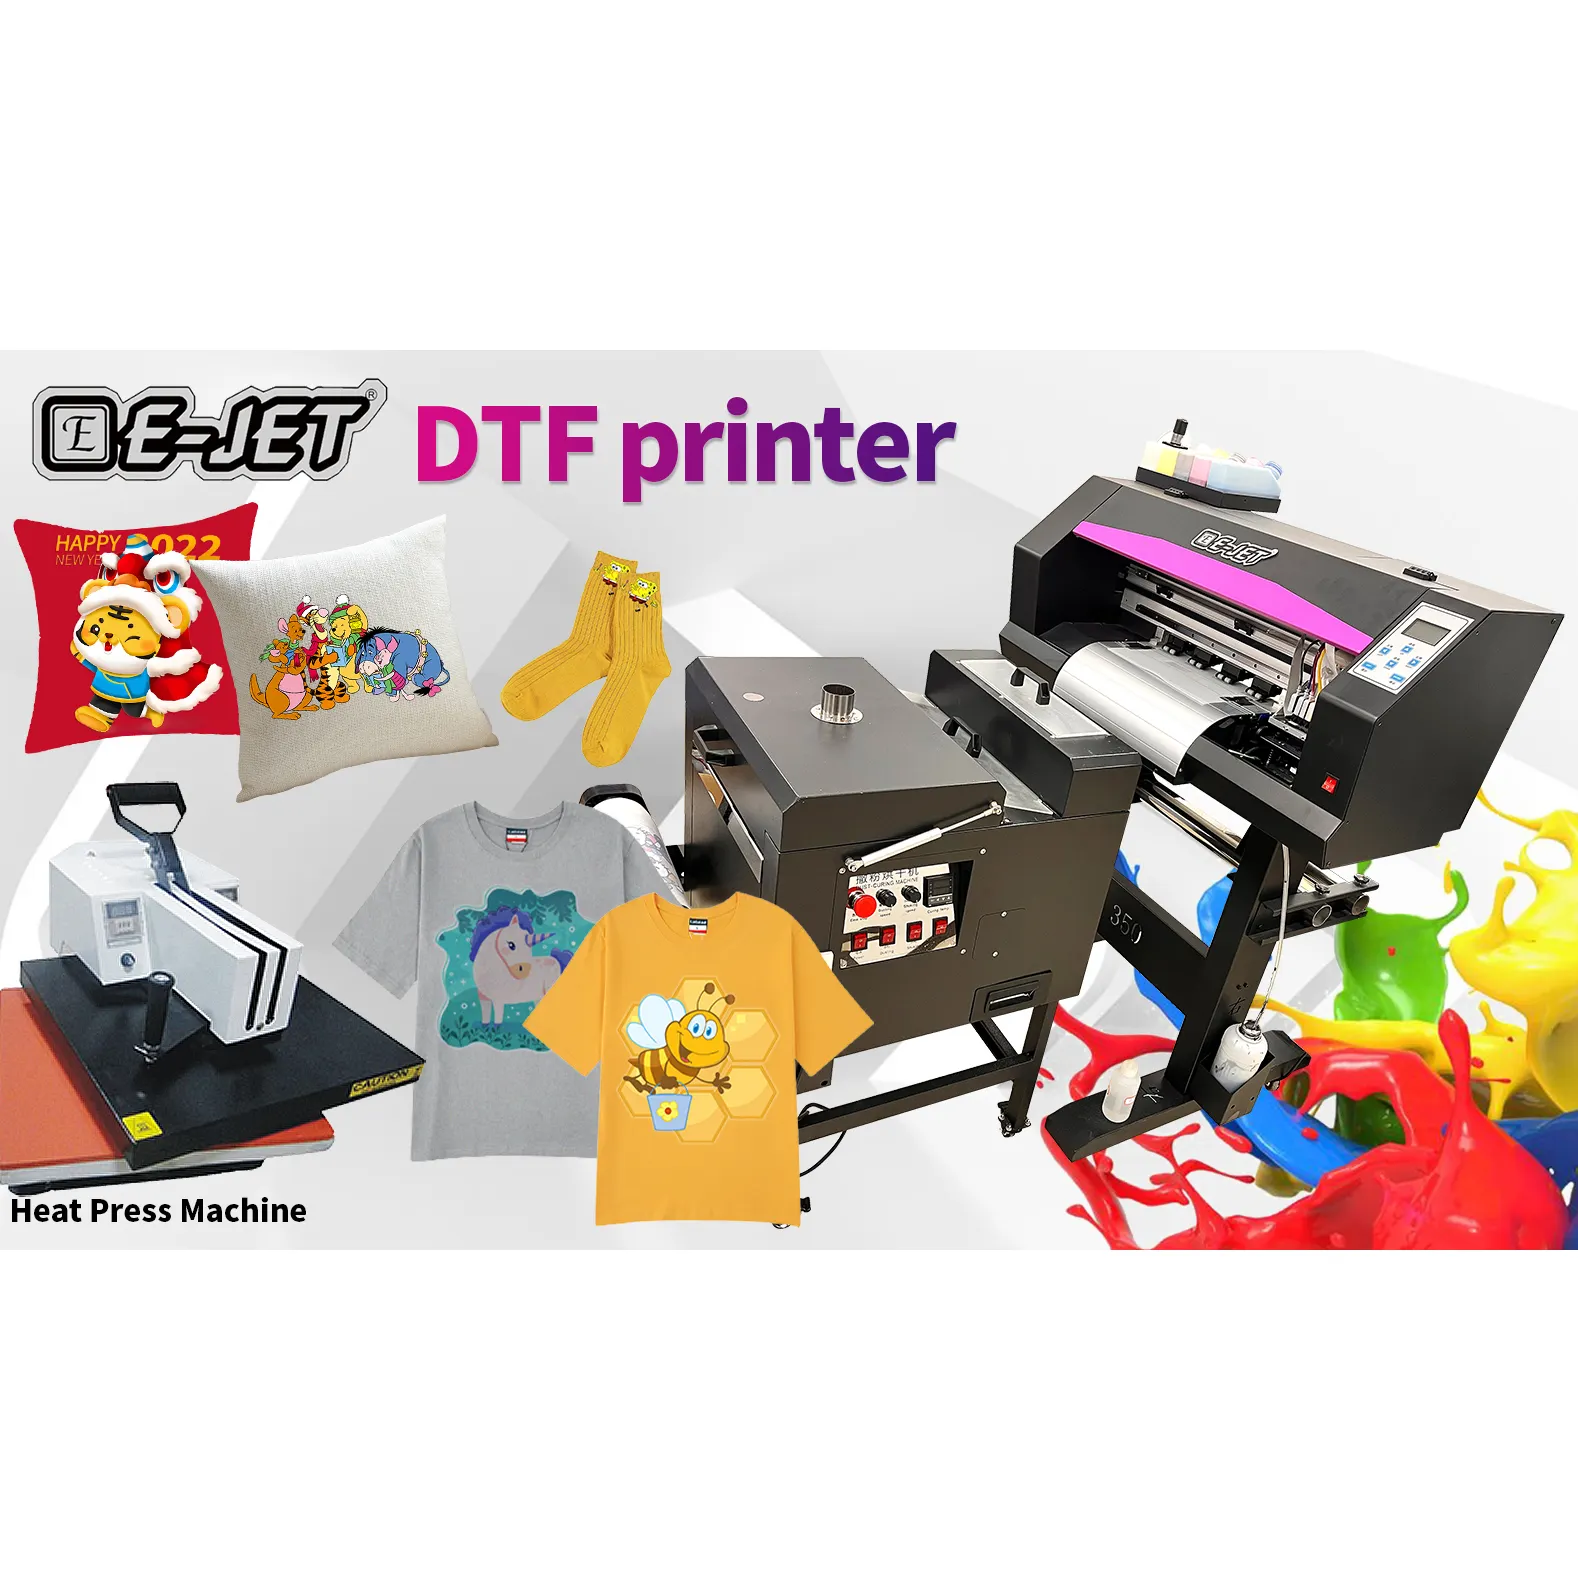 The newest small size dual Xp600 print heads A3 size or 30cm print width DTF printer with 30cm